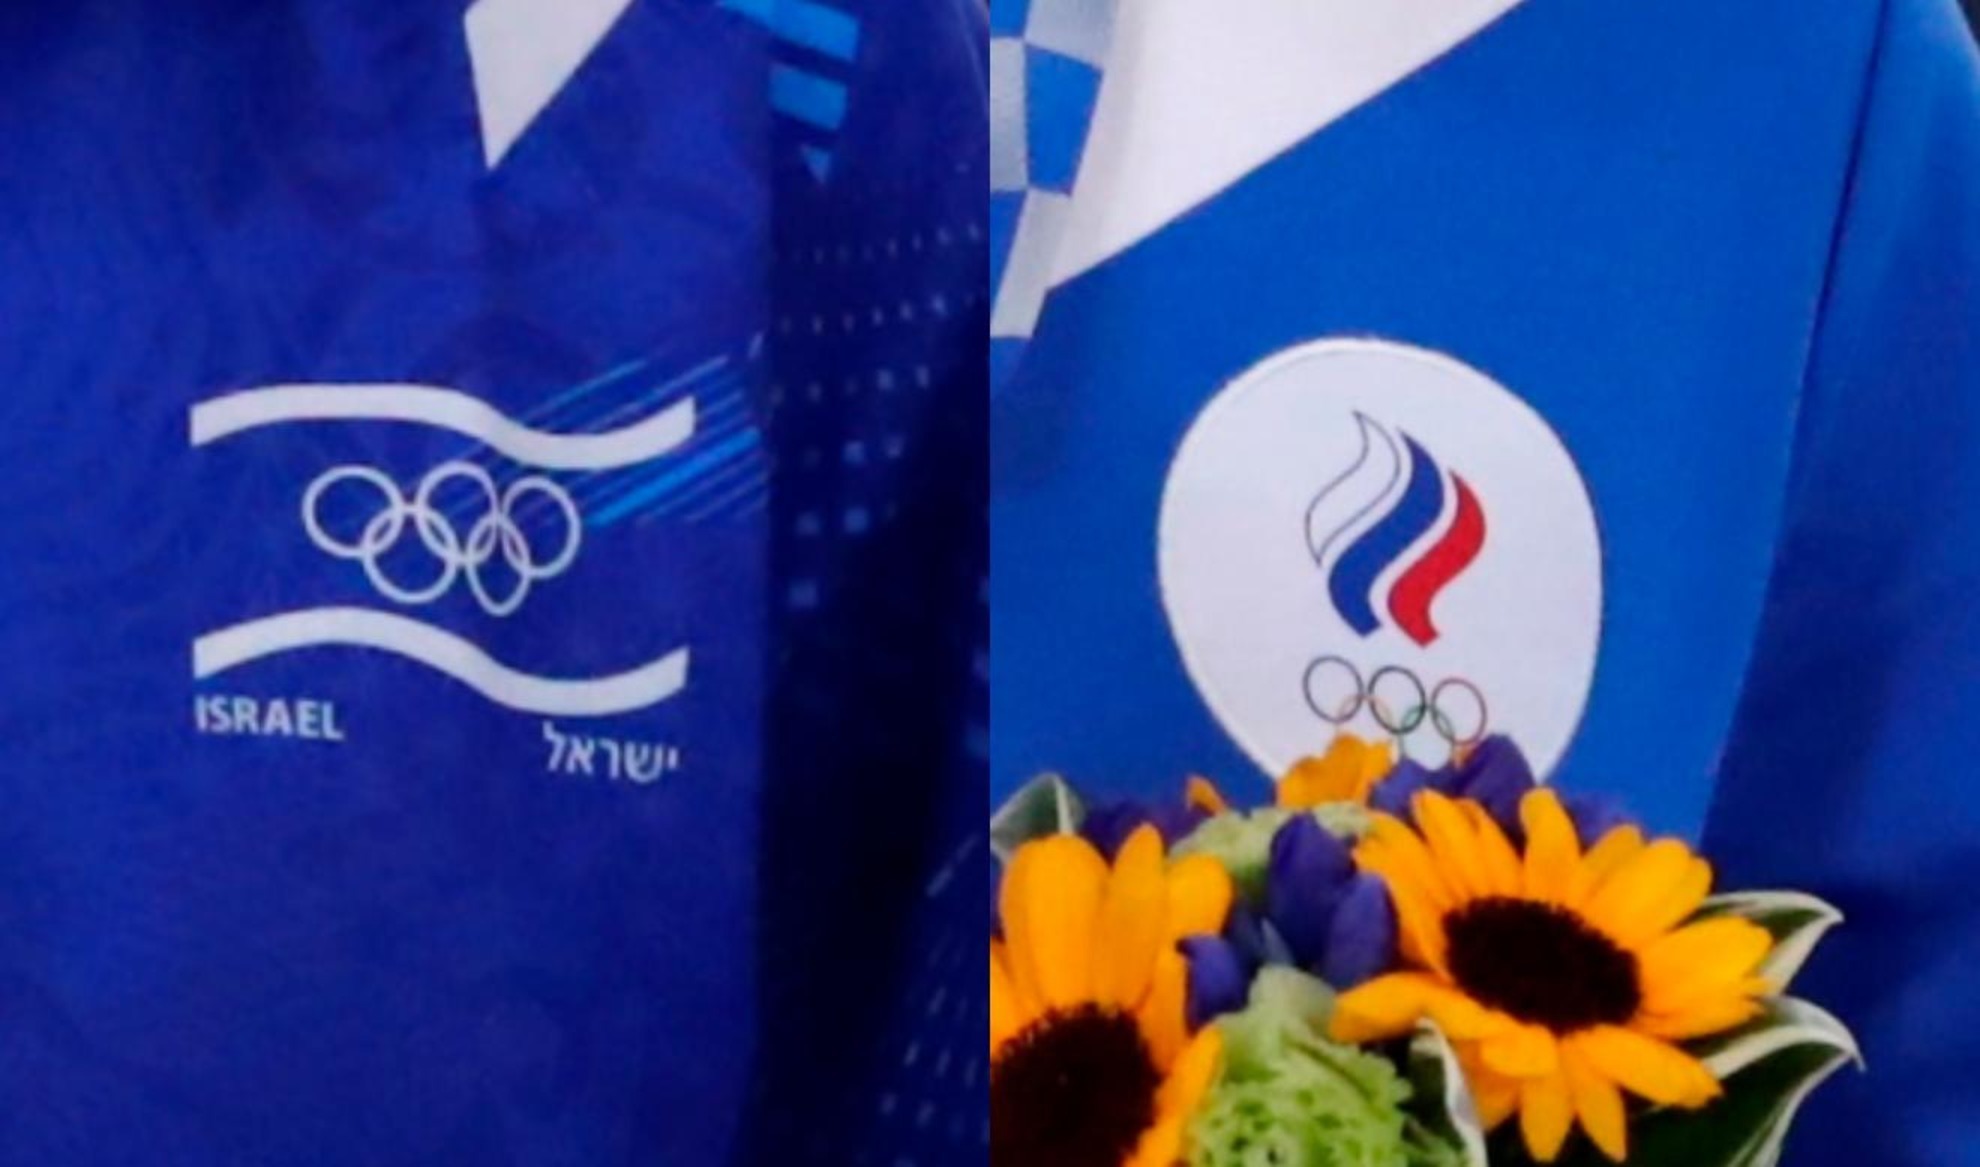 Olympic Emblems of Israel and the Russian Olympic Committee